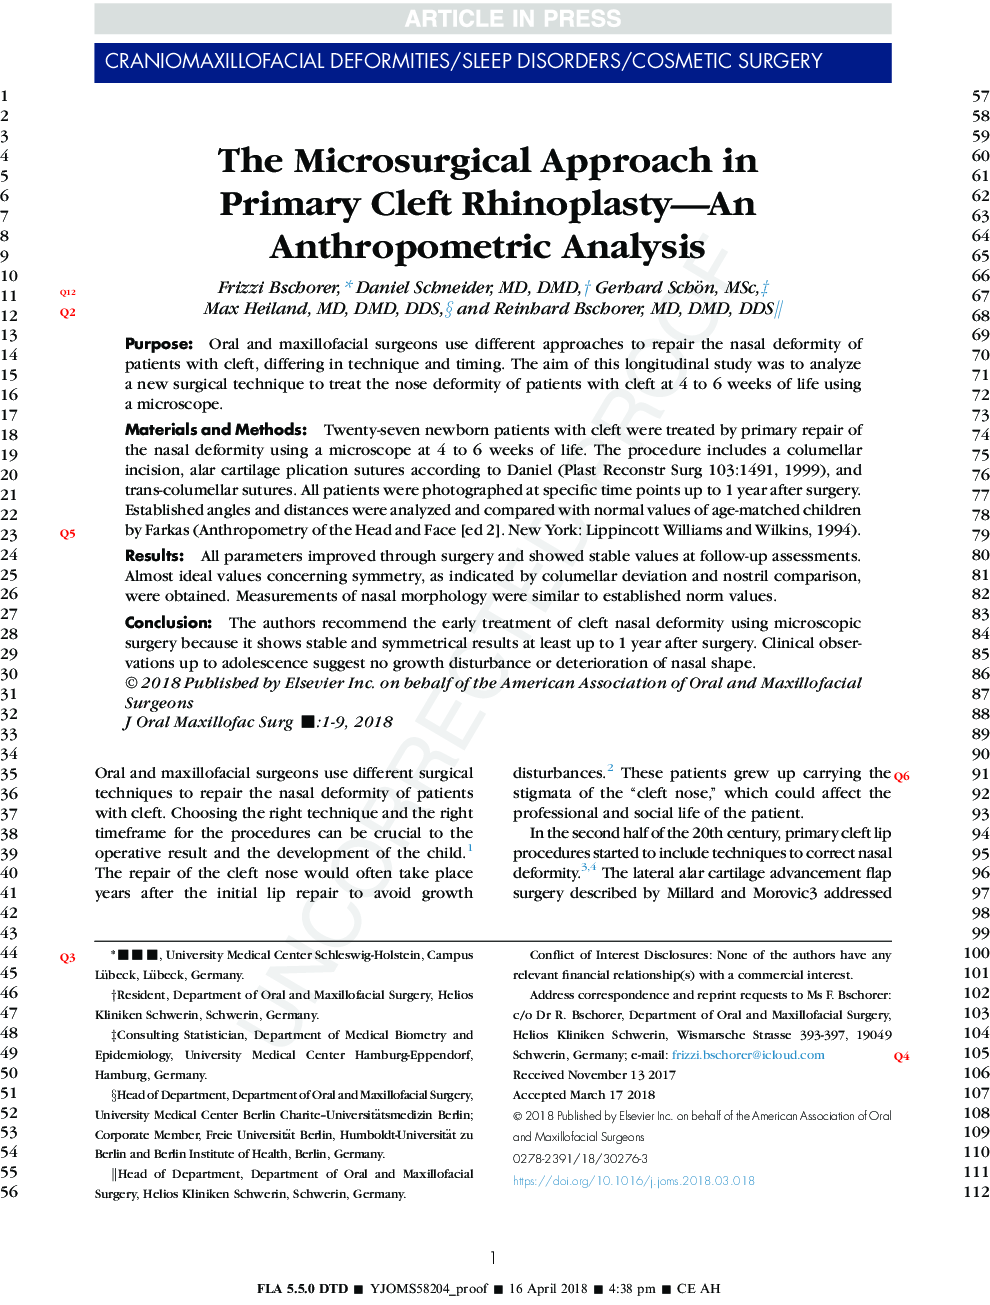 The Microsurgical Approach in Primary Cleft Rhinoplasty-An Anthropometric Analysis